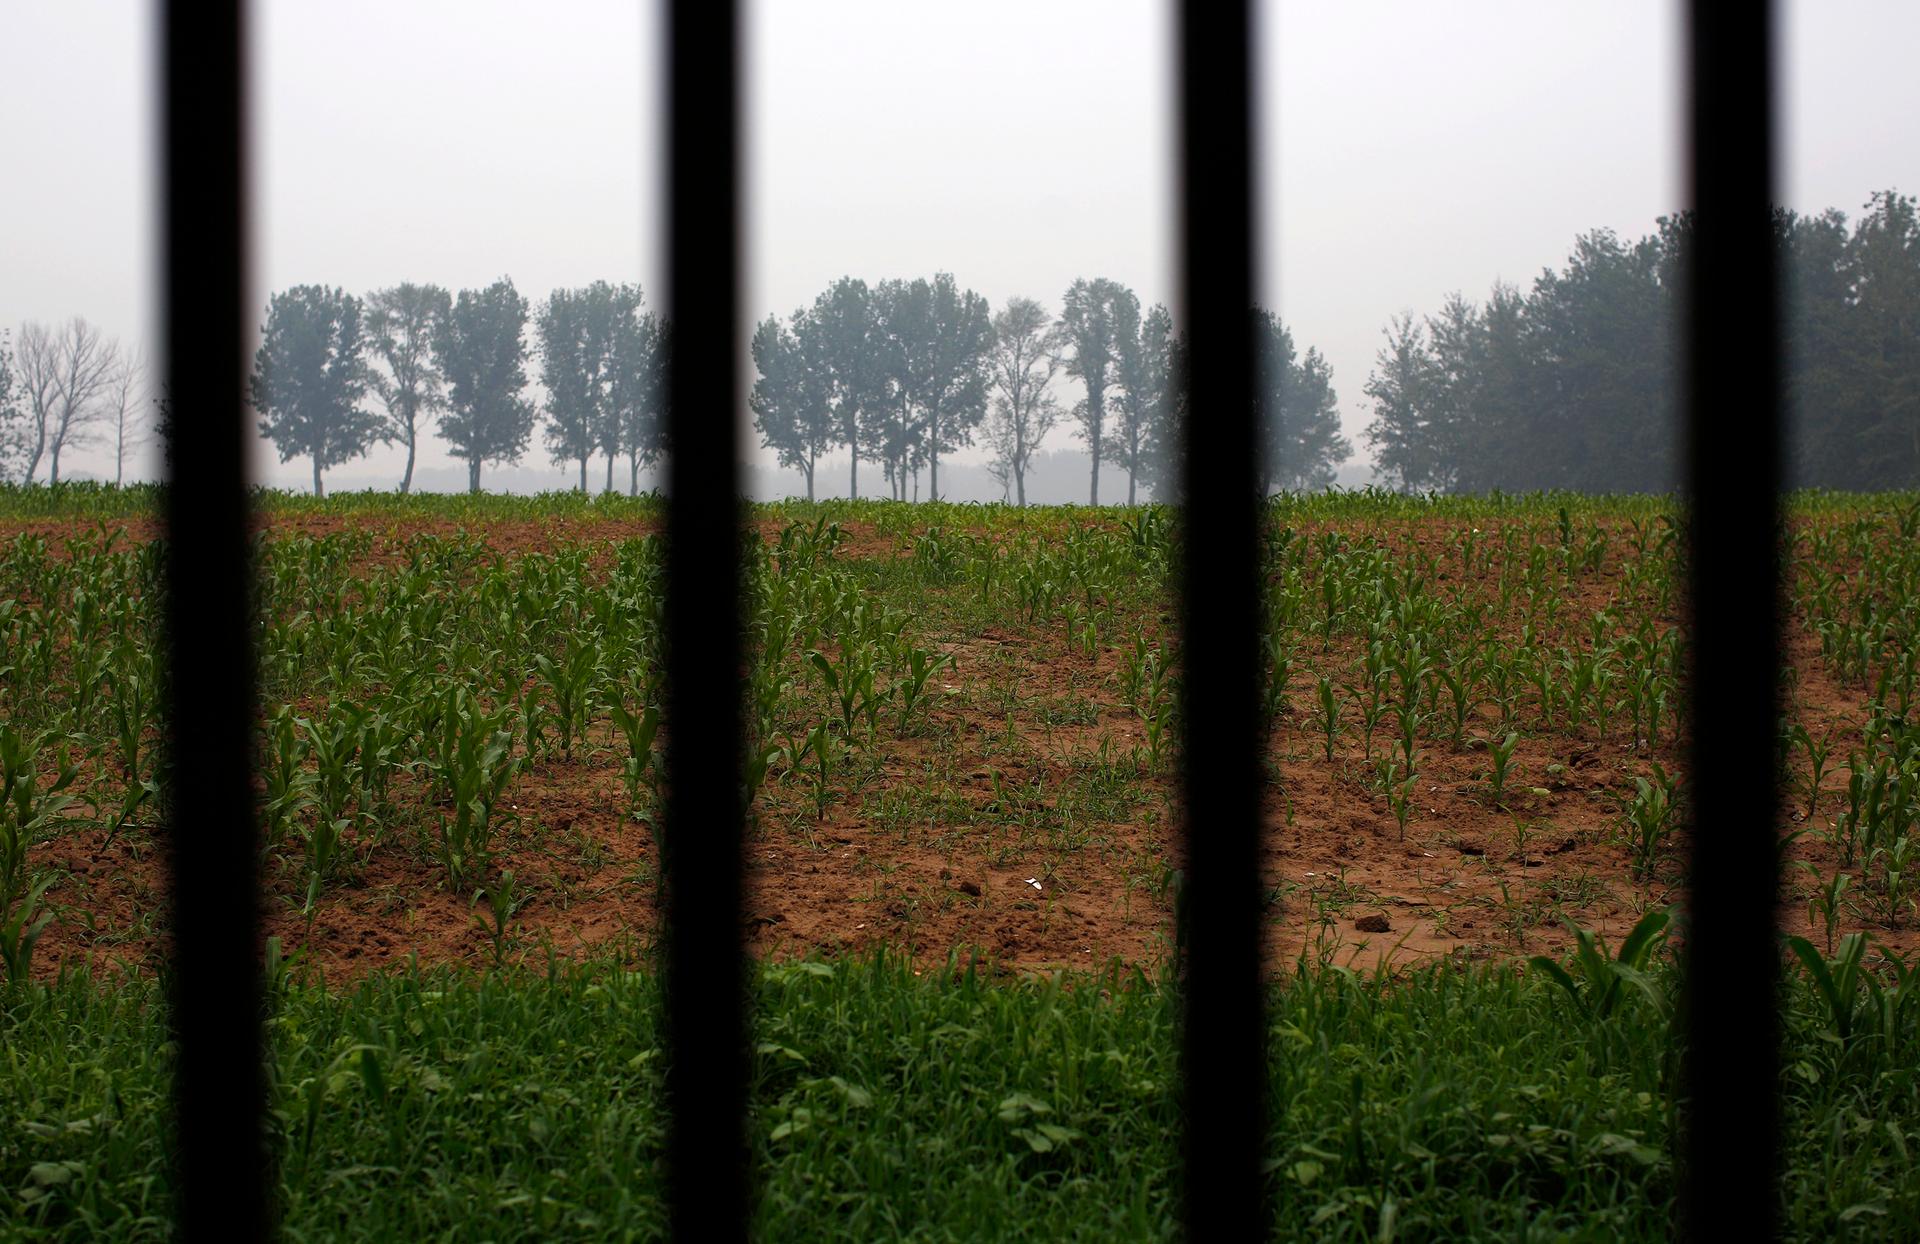 An illegal golf course which was demolished and turned into a cornfield is seen through a fence in the suburbs of Beijing, June 16, 2014.  